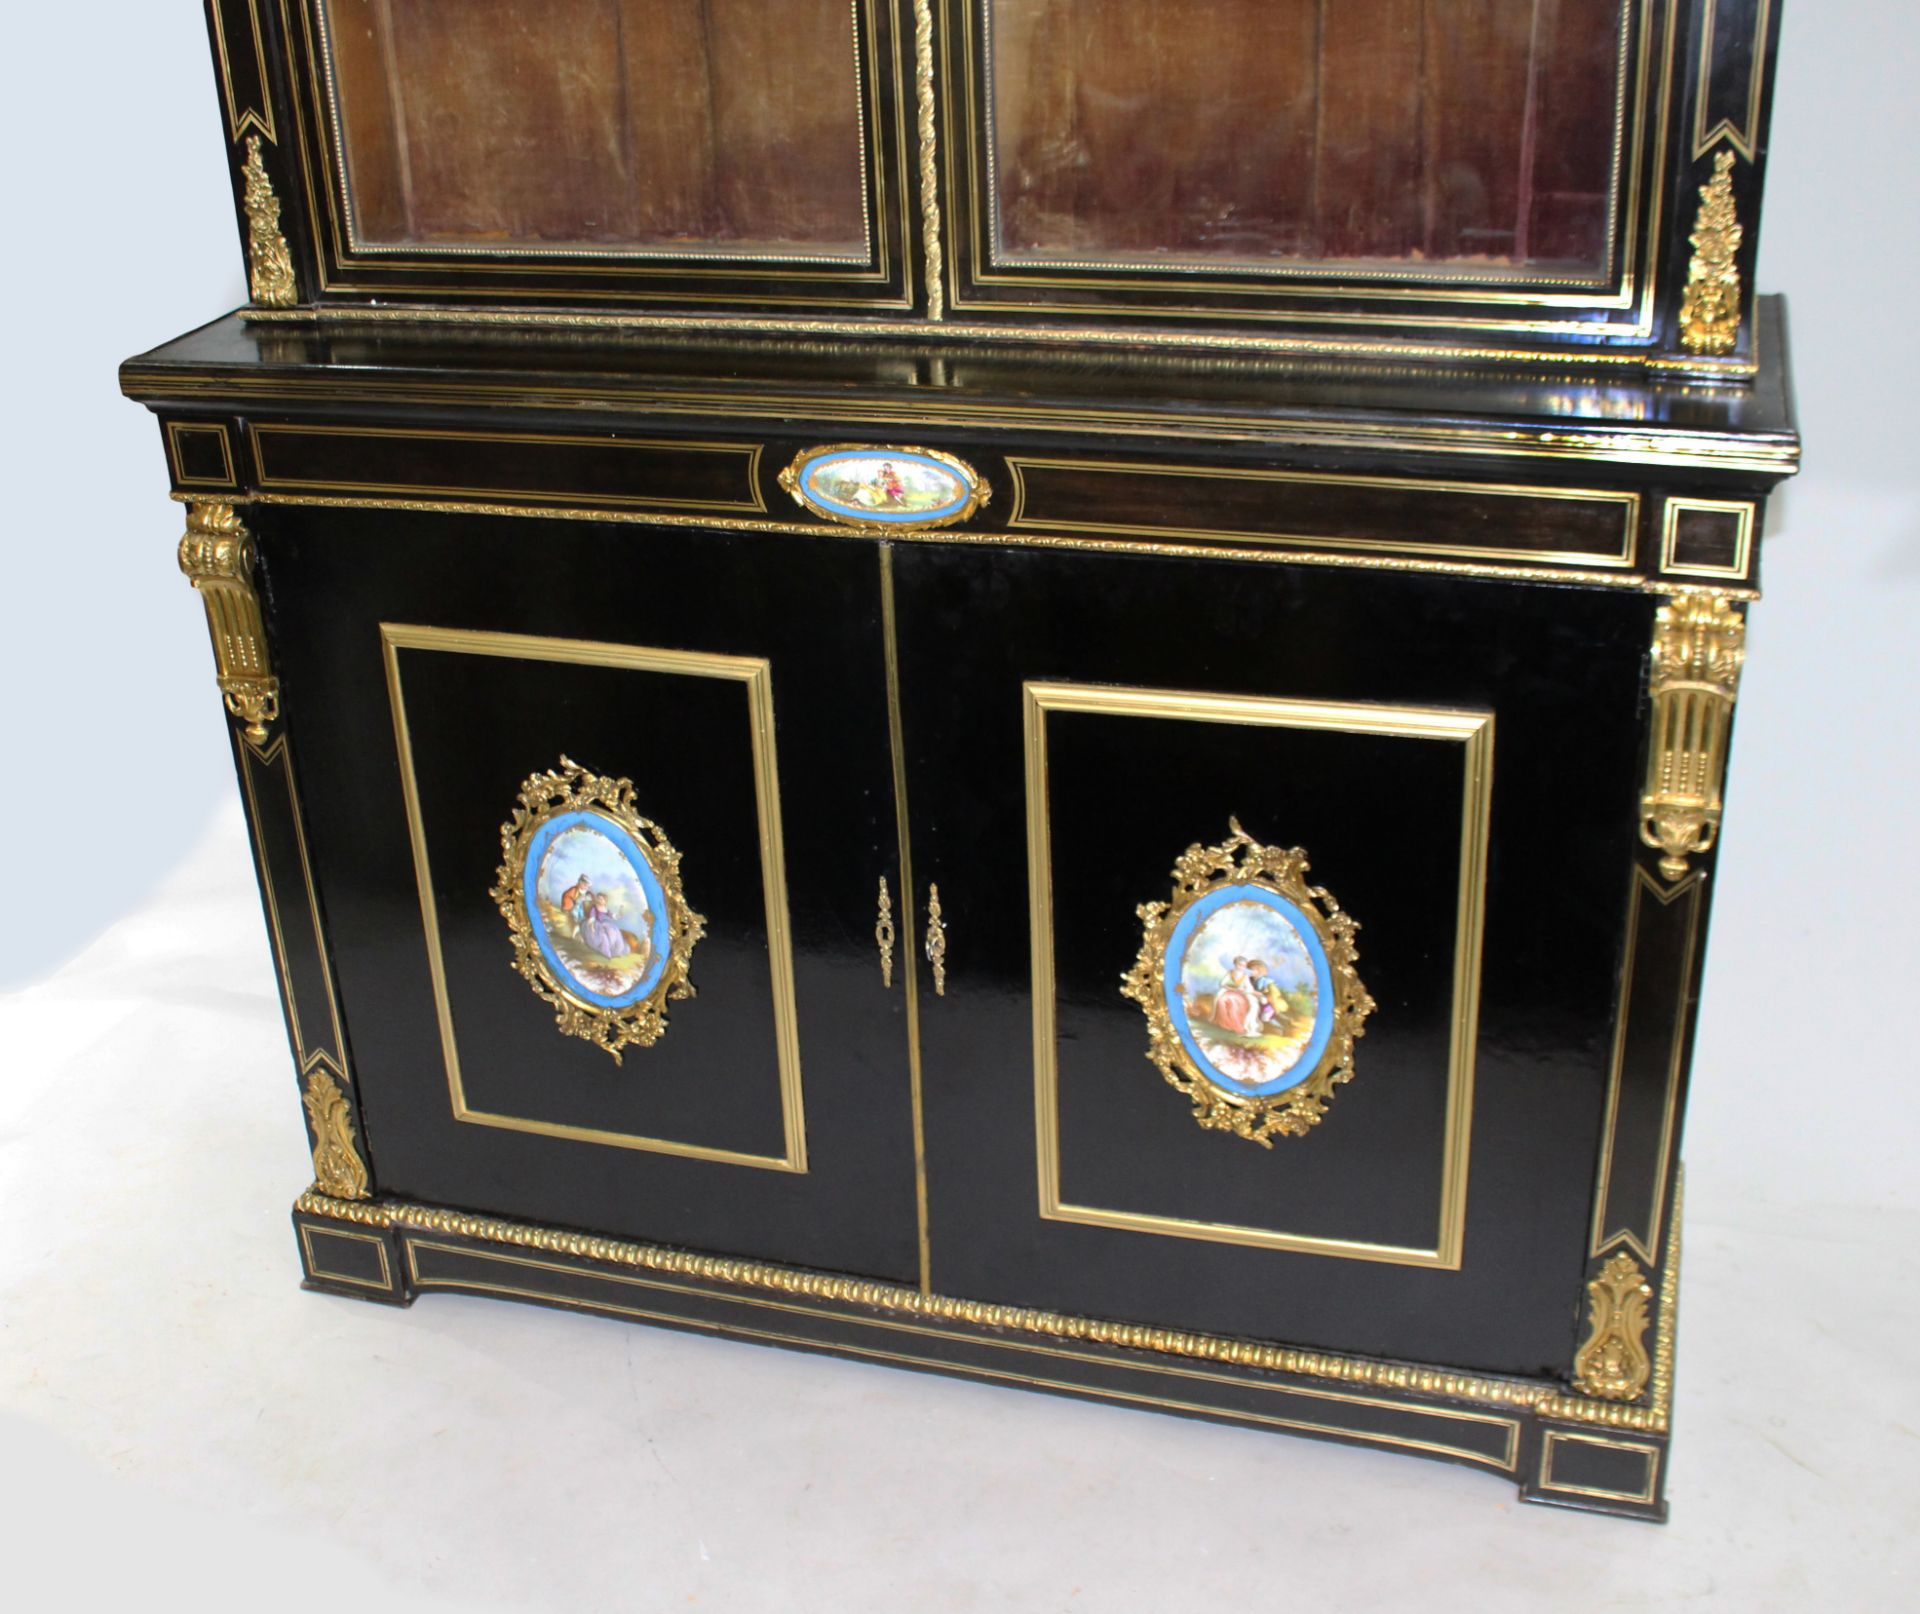 French Brass Inlaid Ebonized Bookcase with Sevres Plaques c.1820 - Image 5 of 7